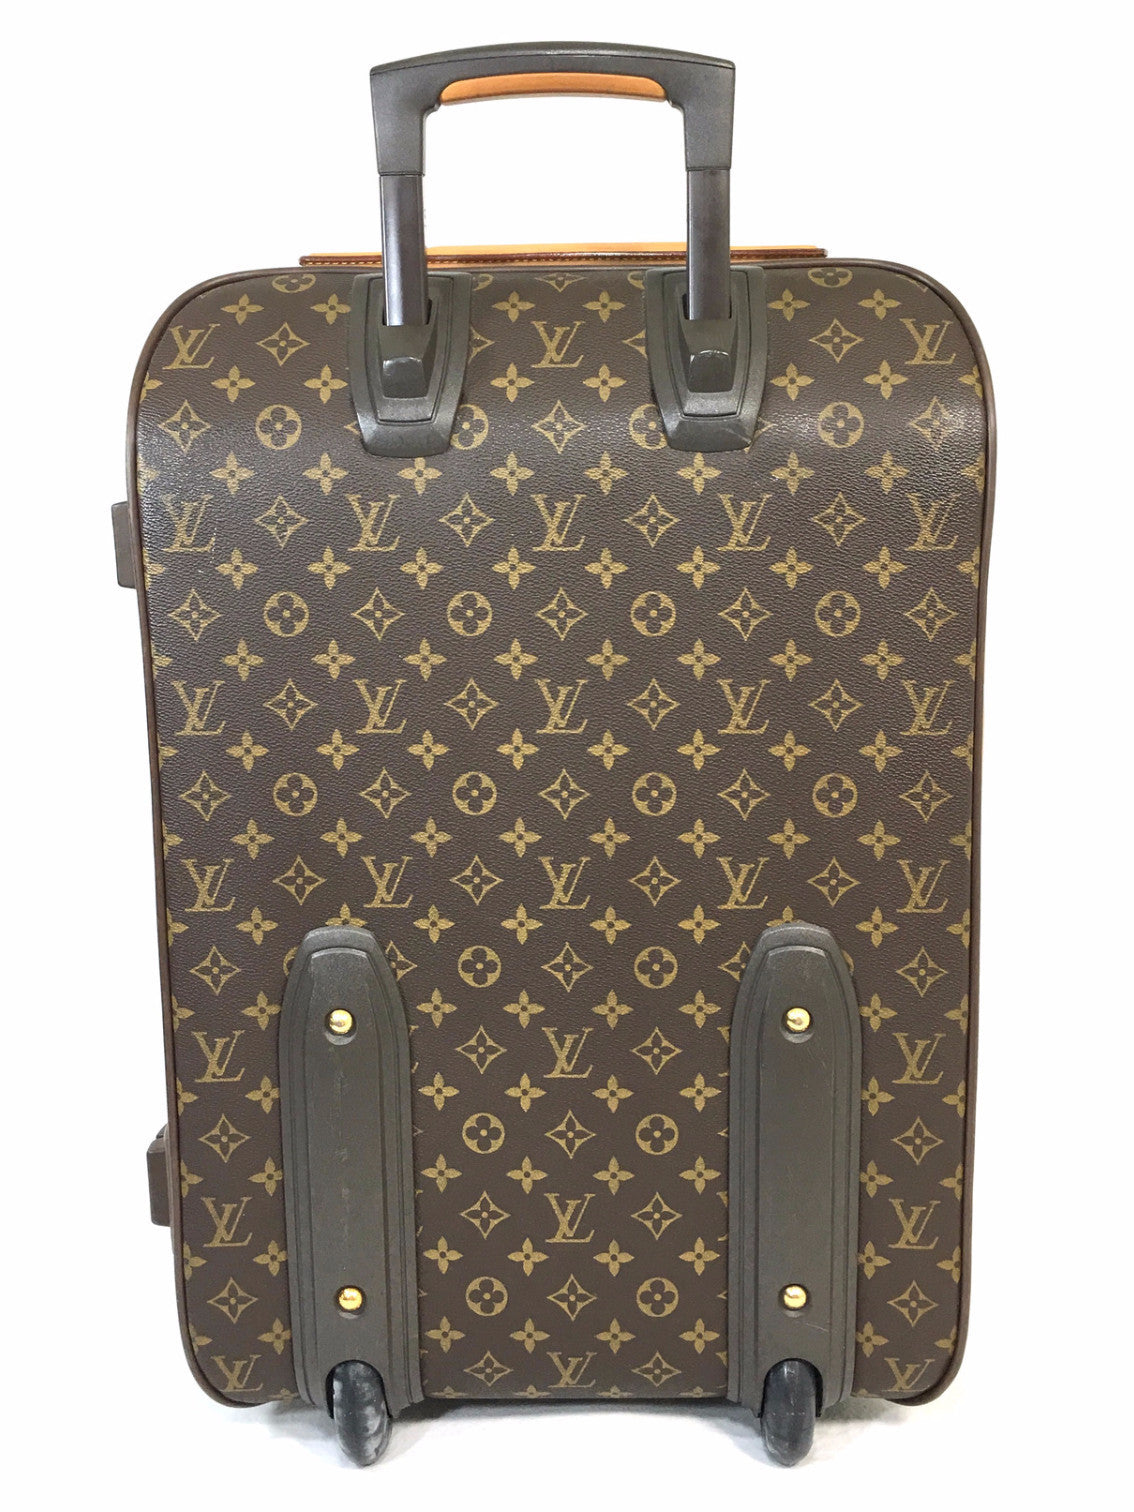 LOUIS VUITTON Monogram Pegase 55 Suitcase Roller Luggage – Pretty Things Hoarder